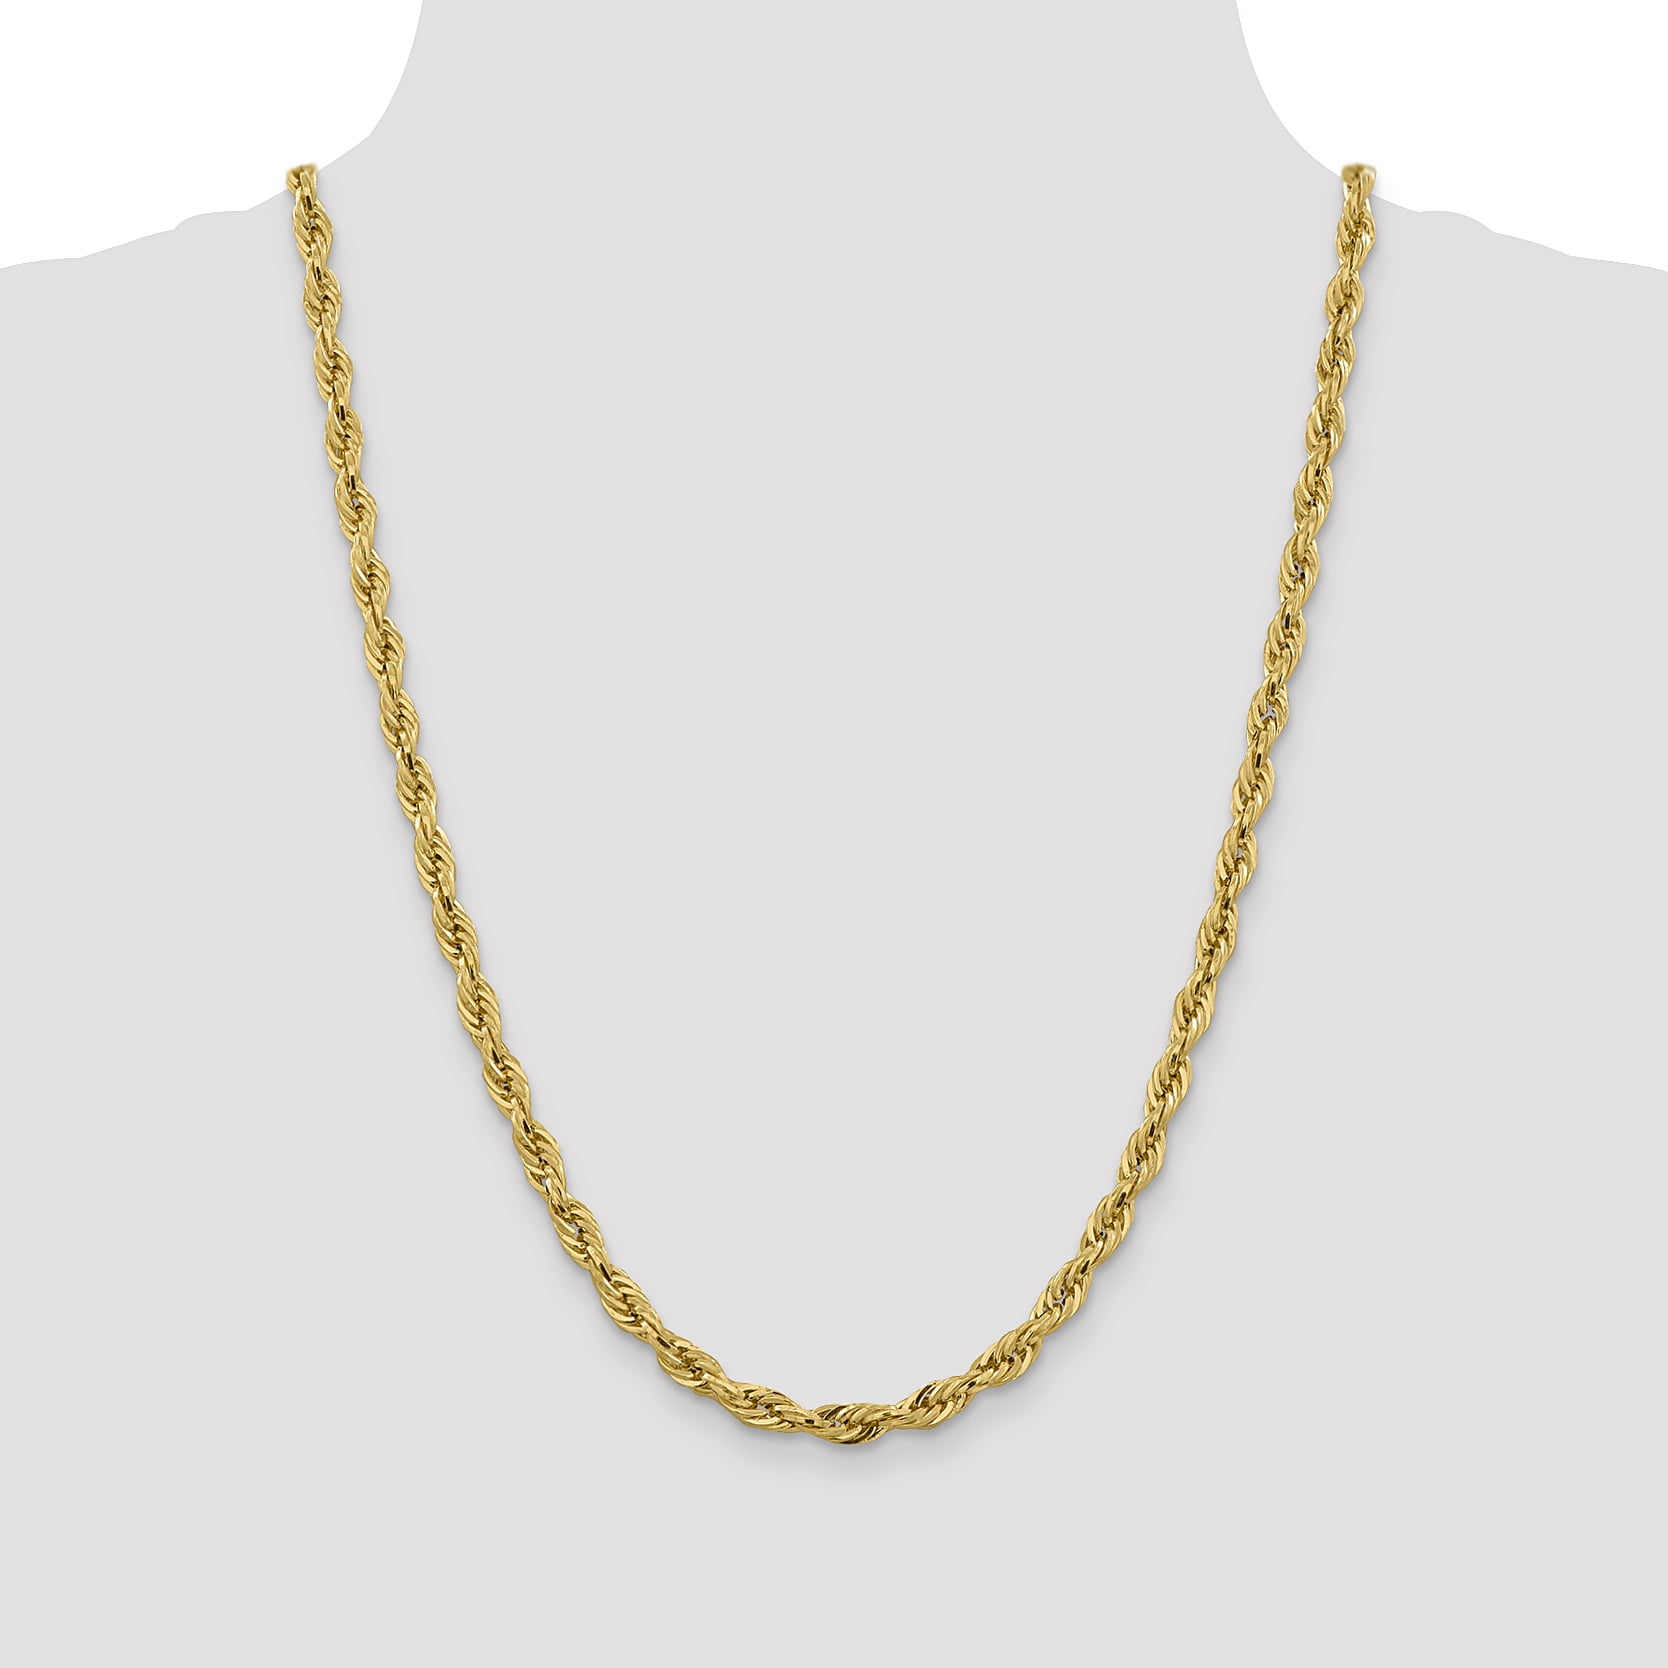 Solid 14k Yellow Gold 1.50mm Diamond-Cut Rope Chain Necklace with